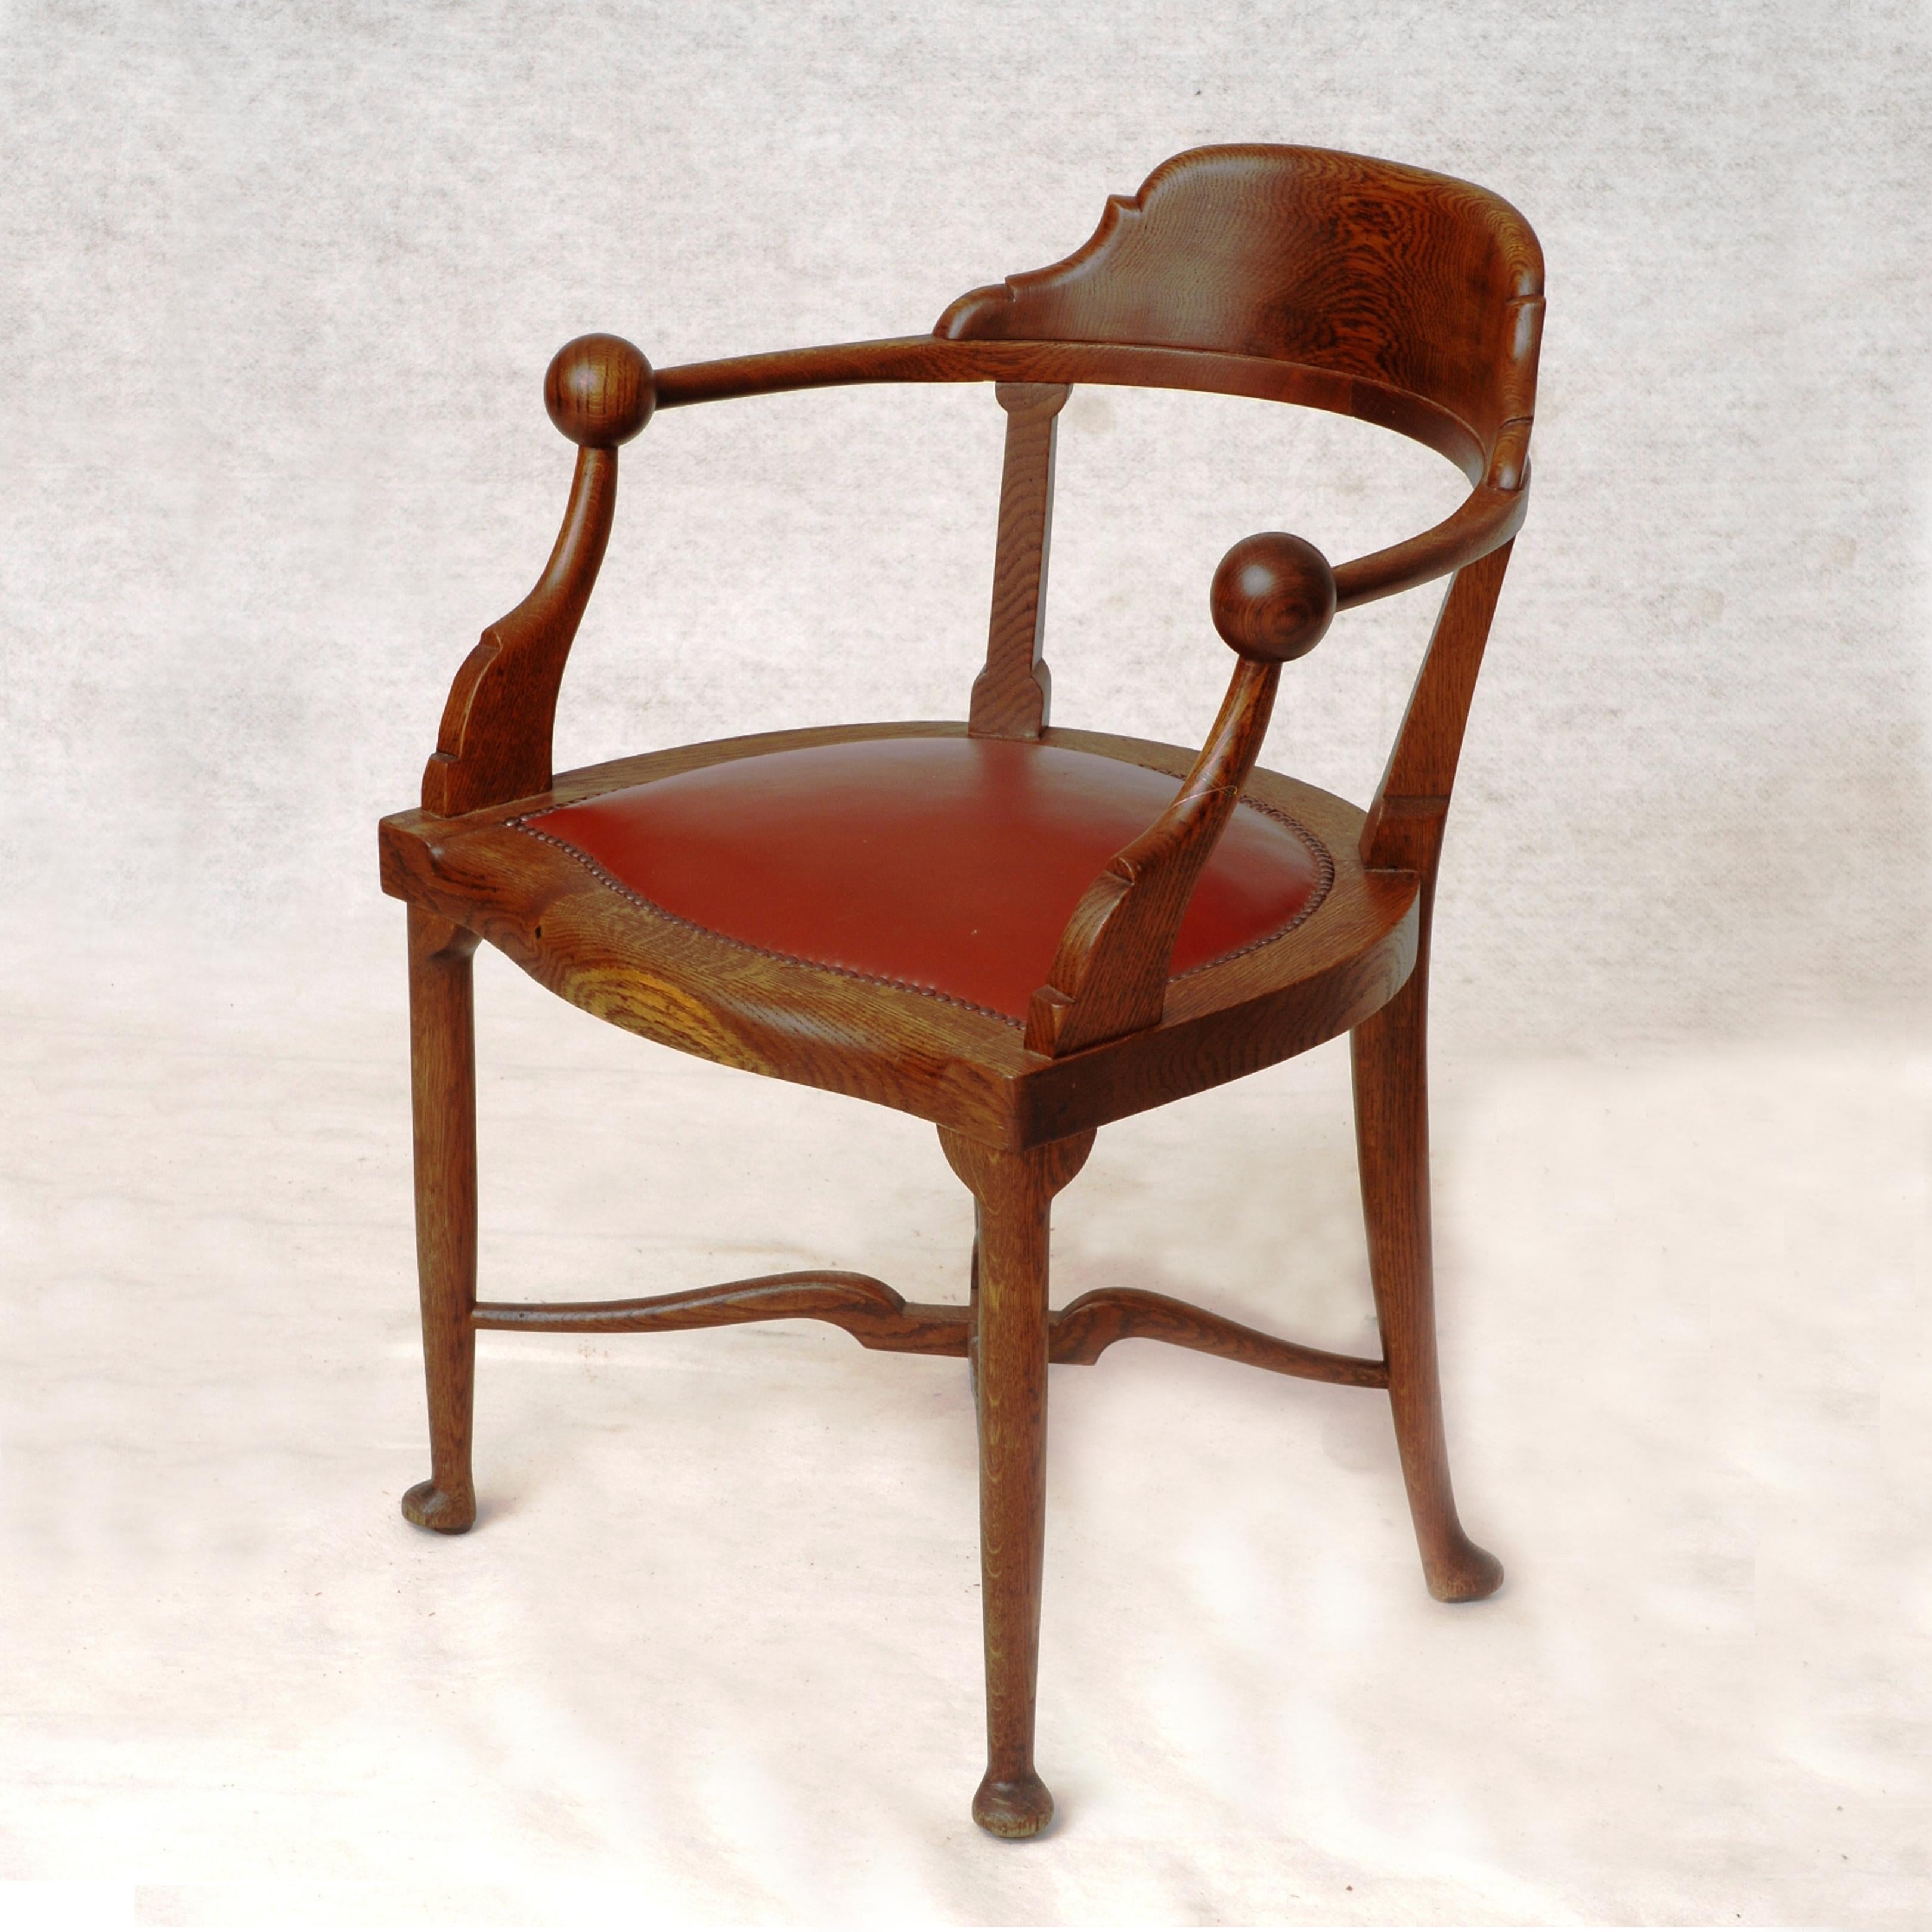 Hungarian Iconic Karoly Lingel Solid Oak Two Spheres Armchair, Hungary, 1900s For Sale